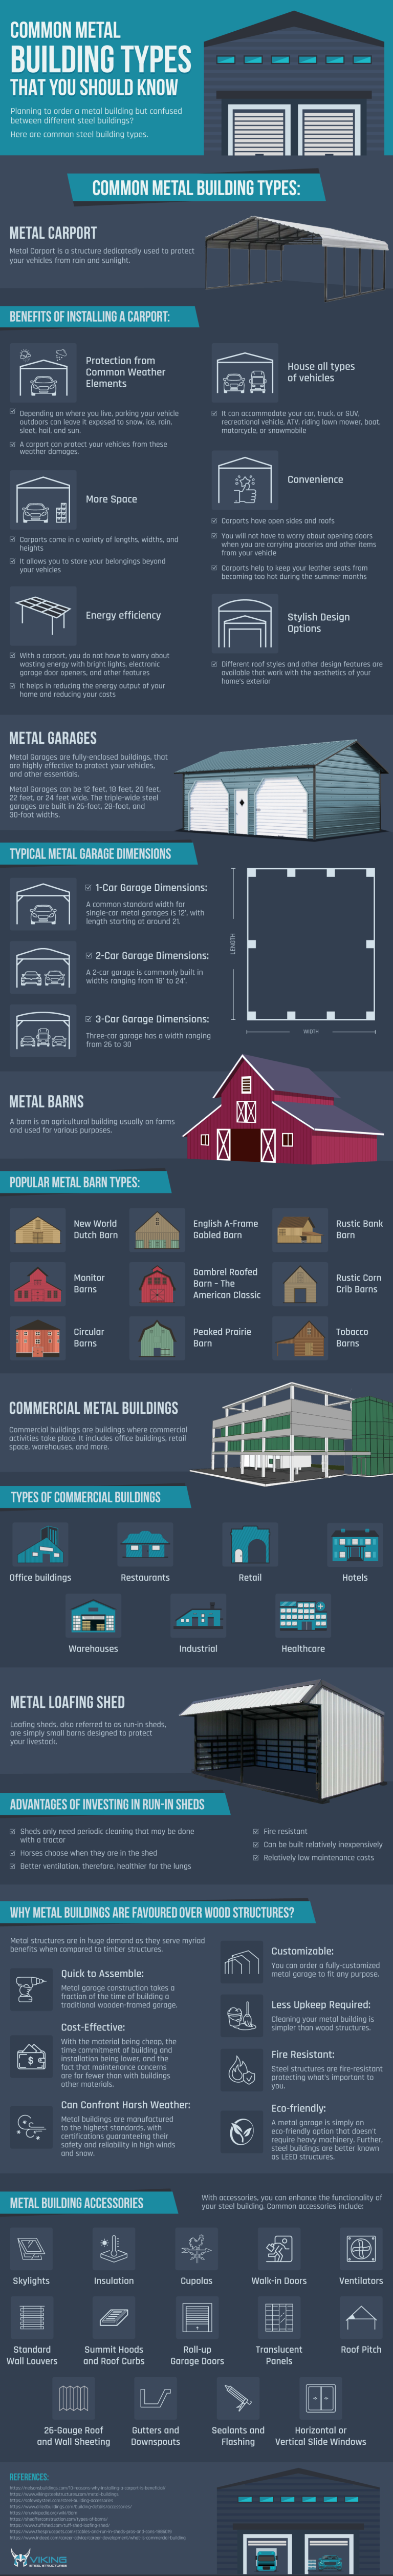 Common Metal Building Types That You Should Know